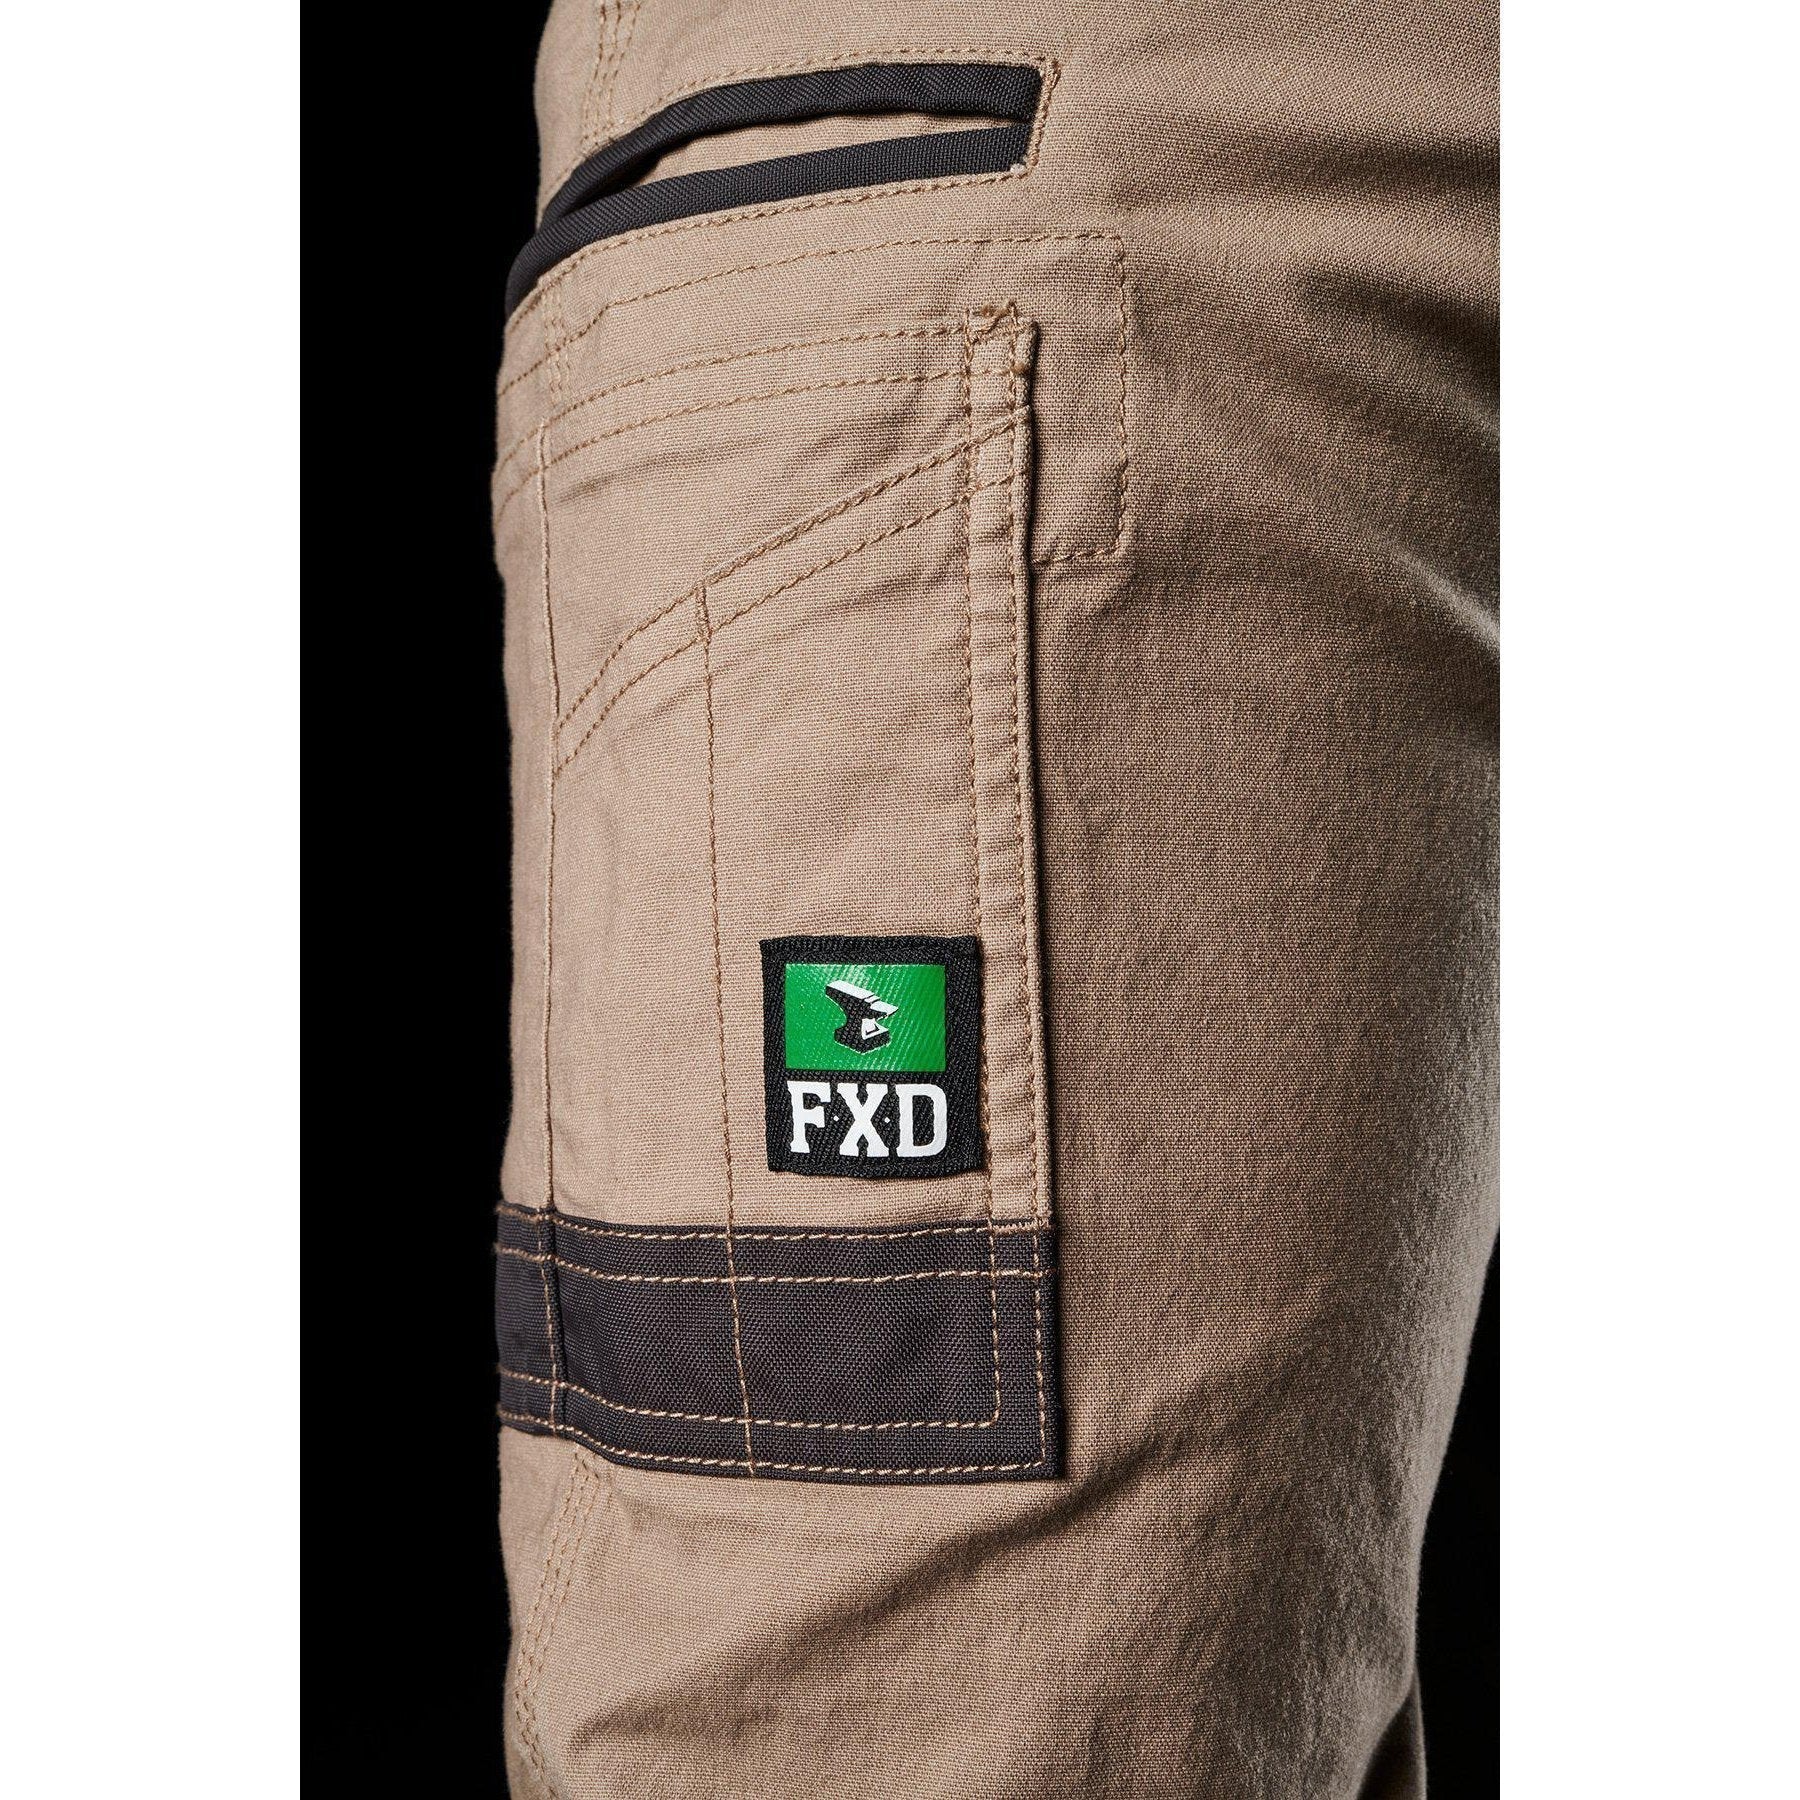 FXD WP-4W Womens Stretch Cuffed Work Pant - Tuff-As Workwear and Safety